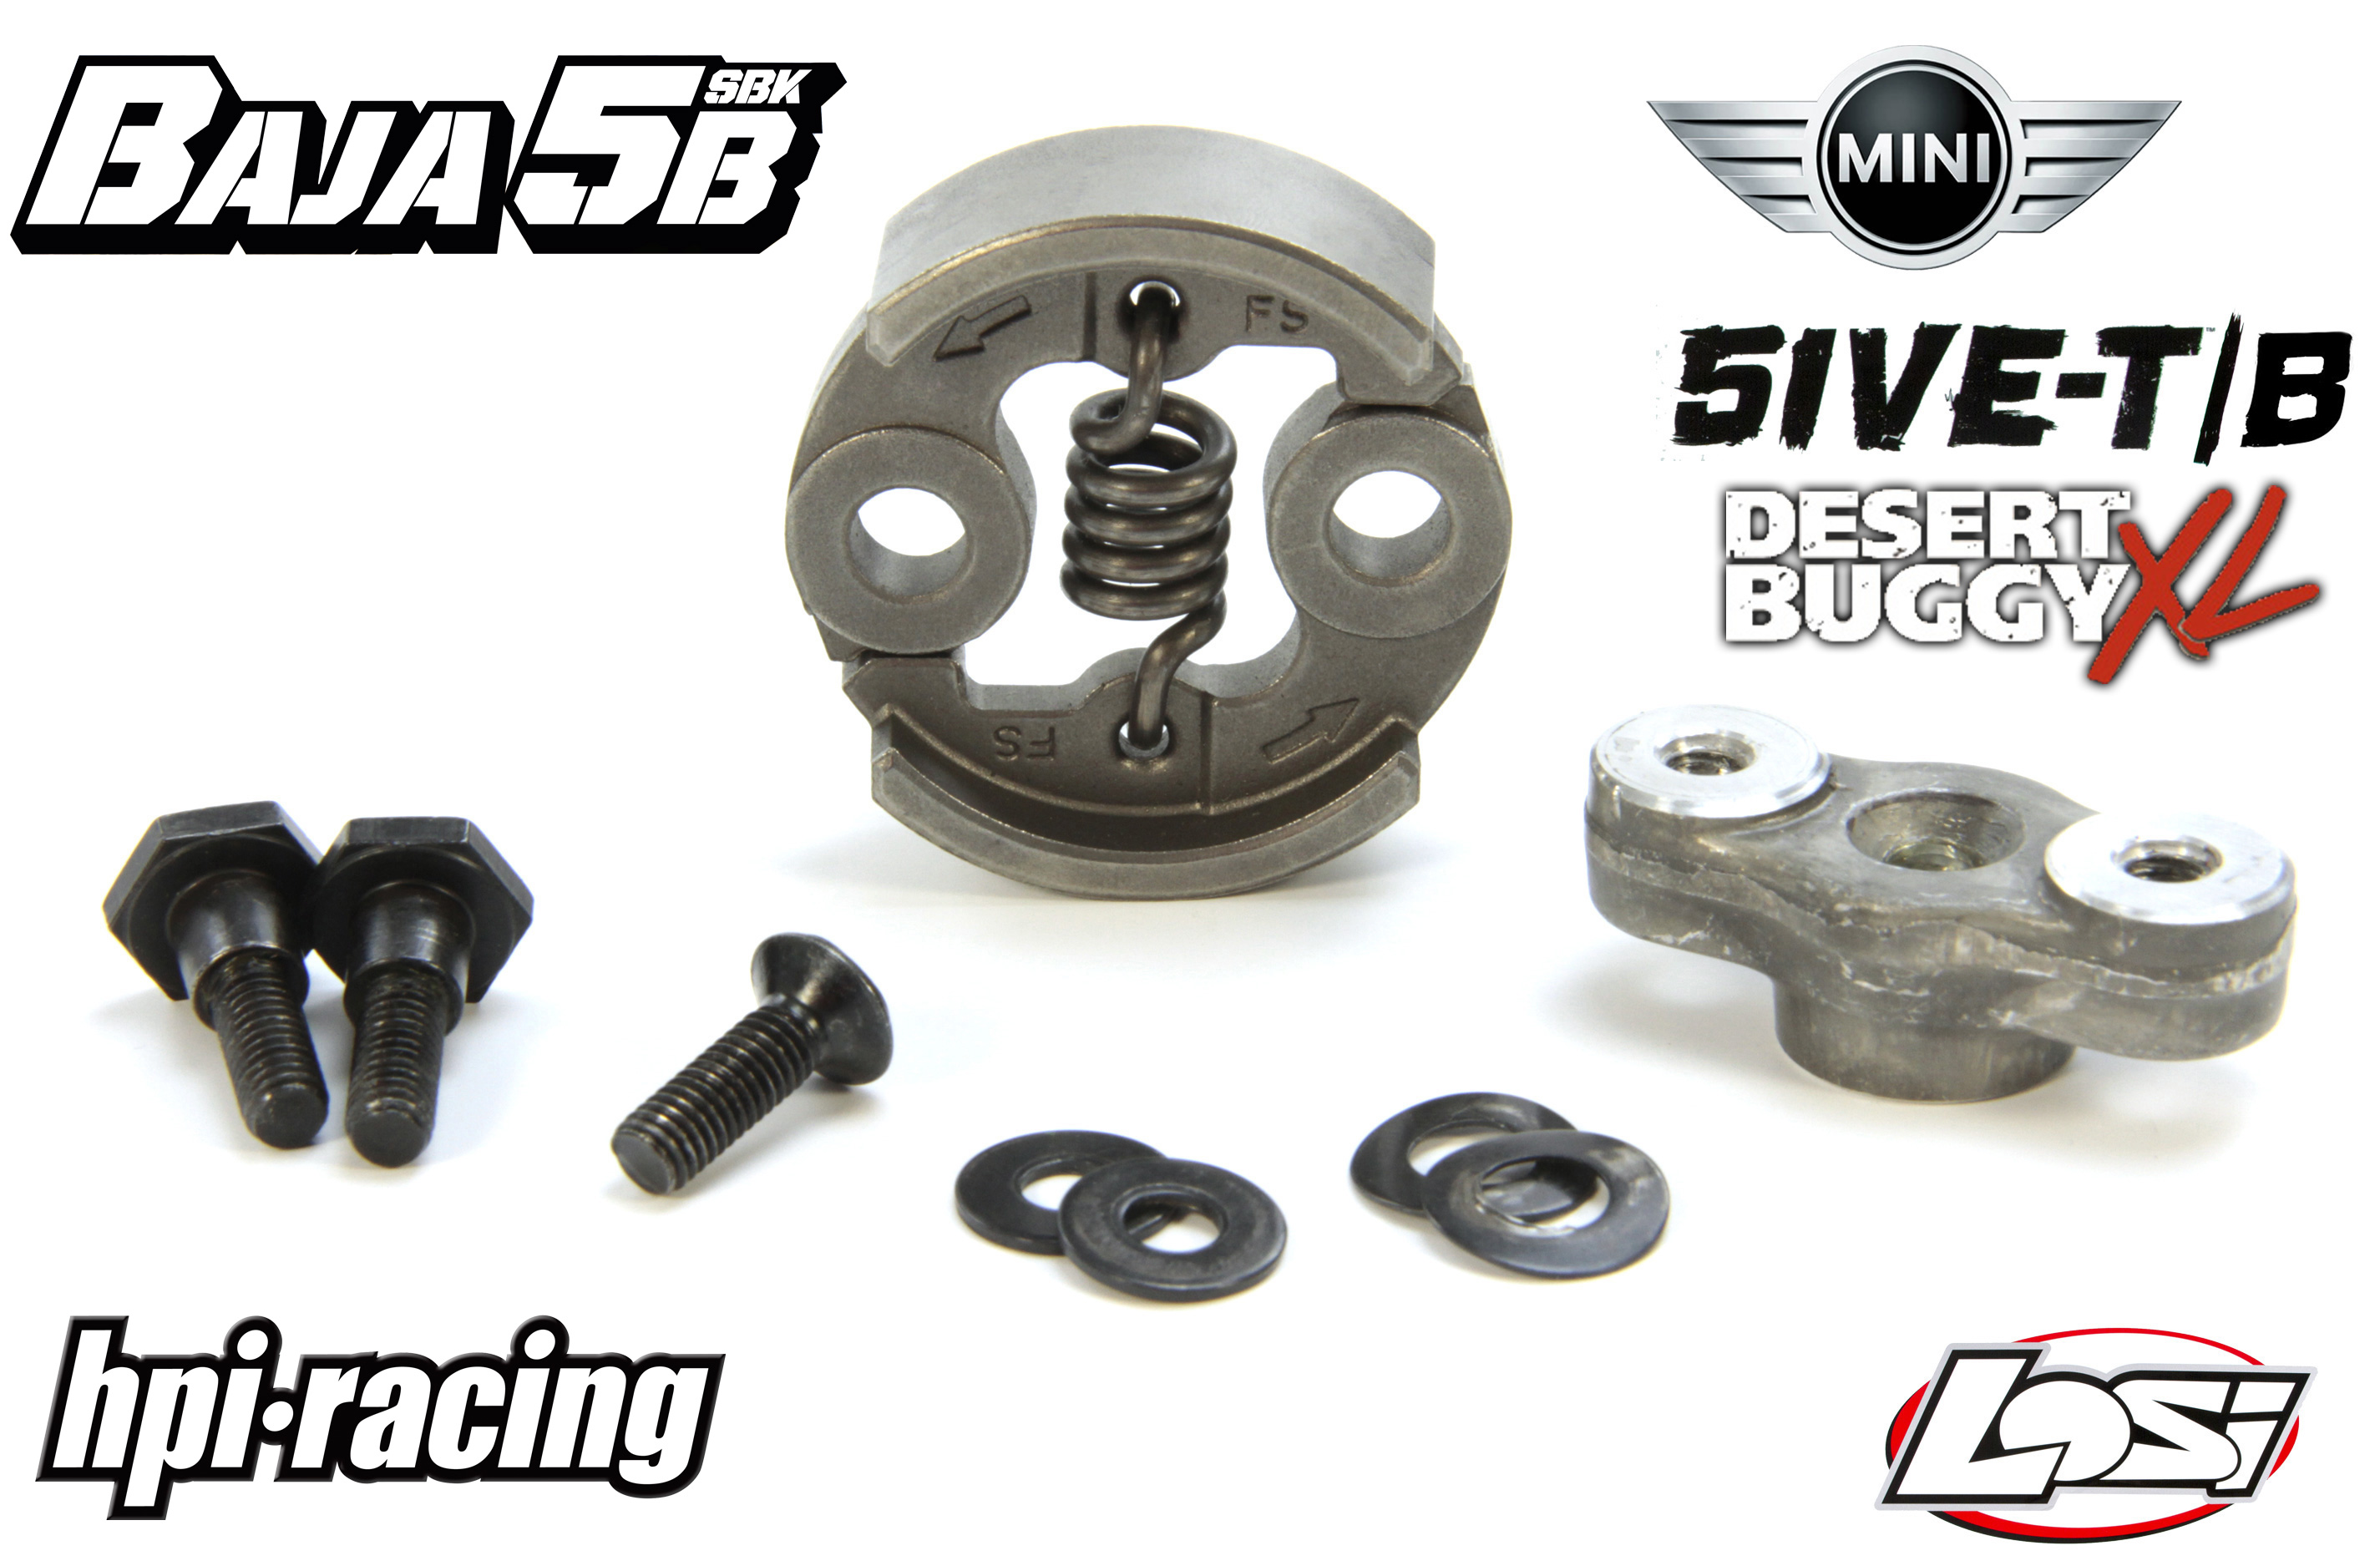 y1419/02 Sintered steel clutch complete set for Losi 5ive-T/2.0, Mini and Desert Buggy